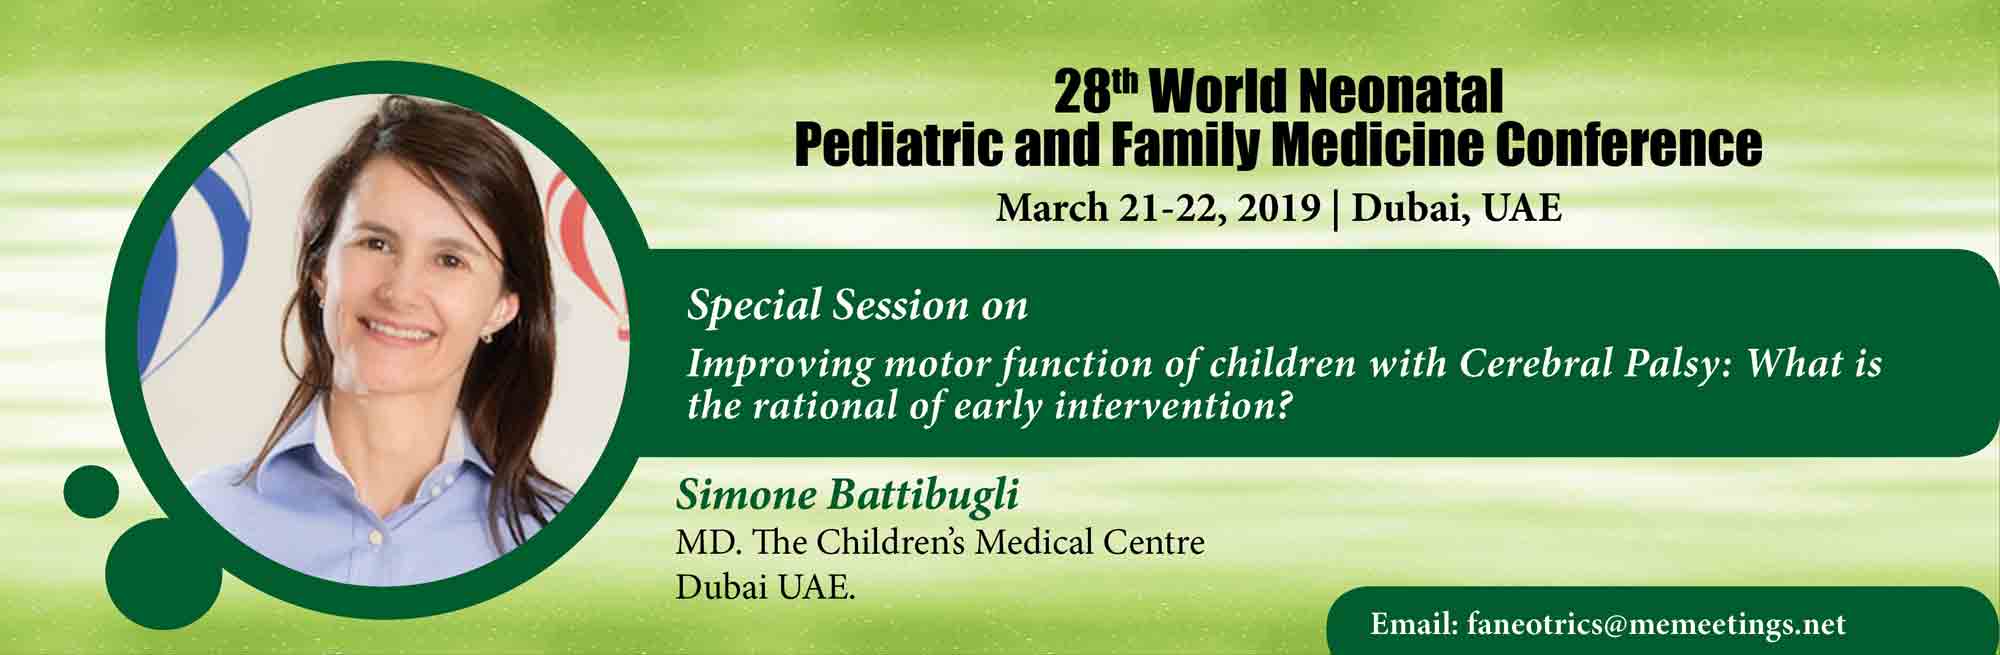 28th World Neonatal, Pediatrics and Family Medicine Conference 2019 - Coming Soon in UAE